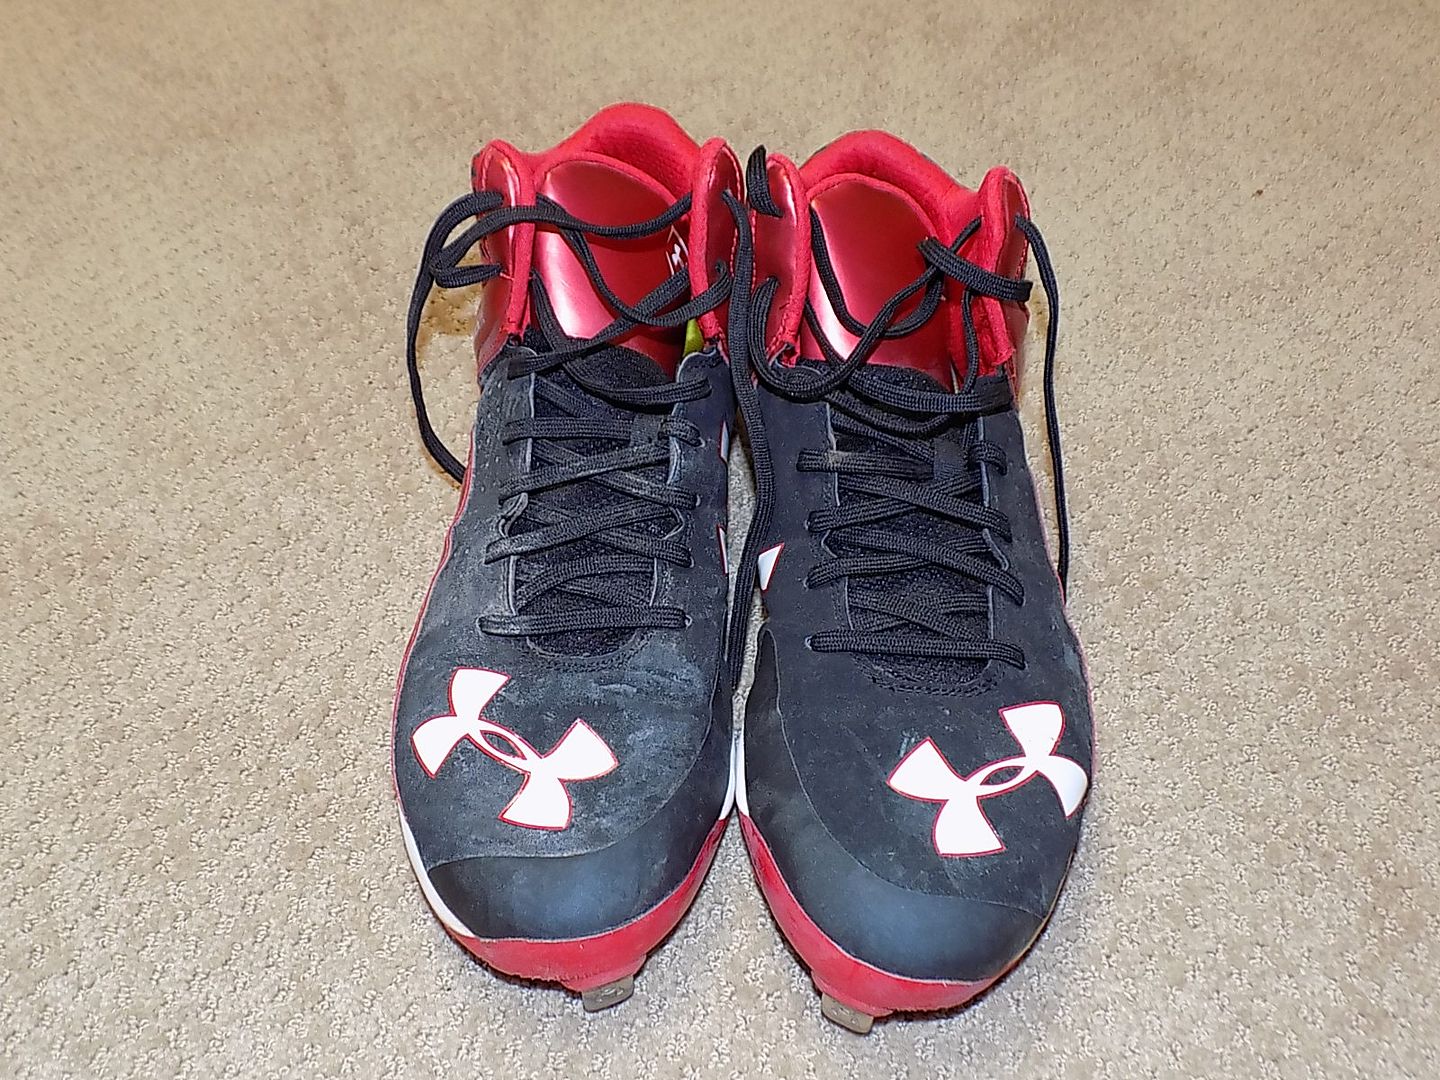 Mookie Betts Game Worn Under Armour Signed Cleats Boston Red Sox JSA | eBay